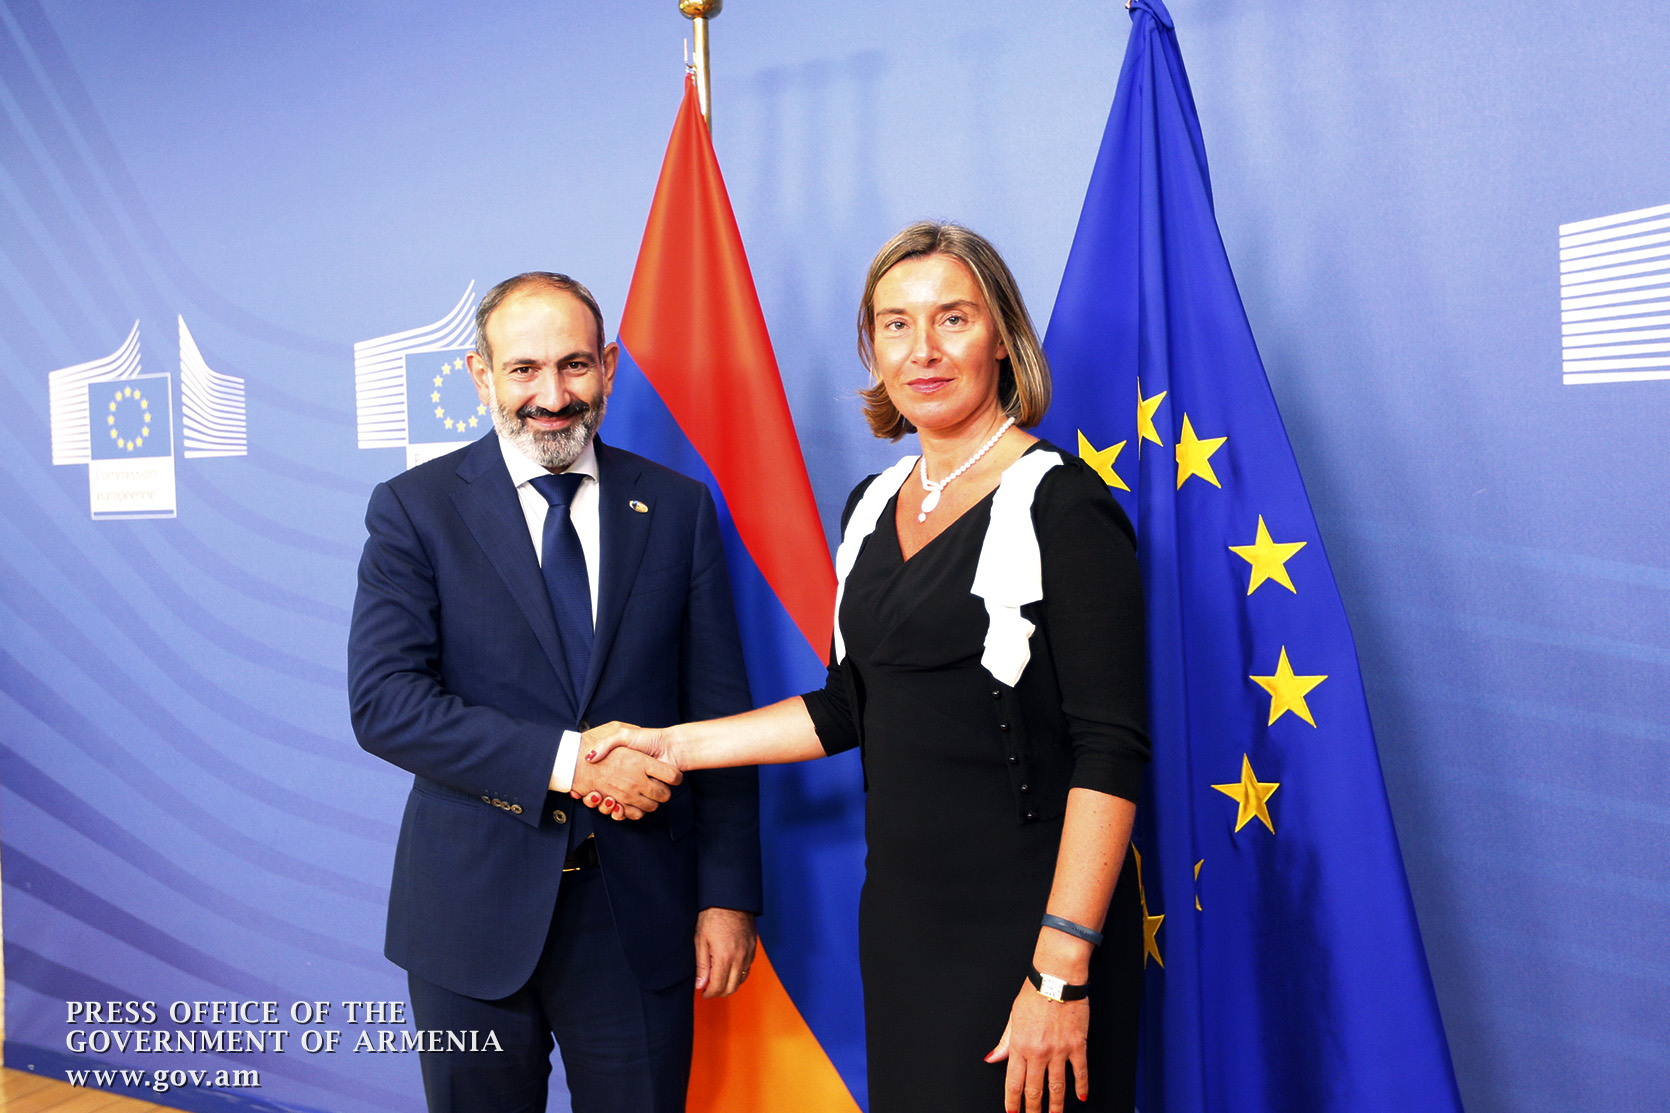 Pashinyan and Mogherini discussed importance of implementing the EU-Armenia Comprehensive and Enhanced Partnership Agreement to underpin domestic reform in Armenia